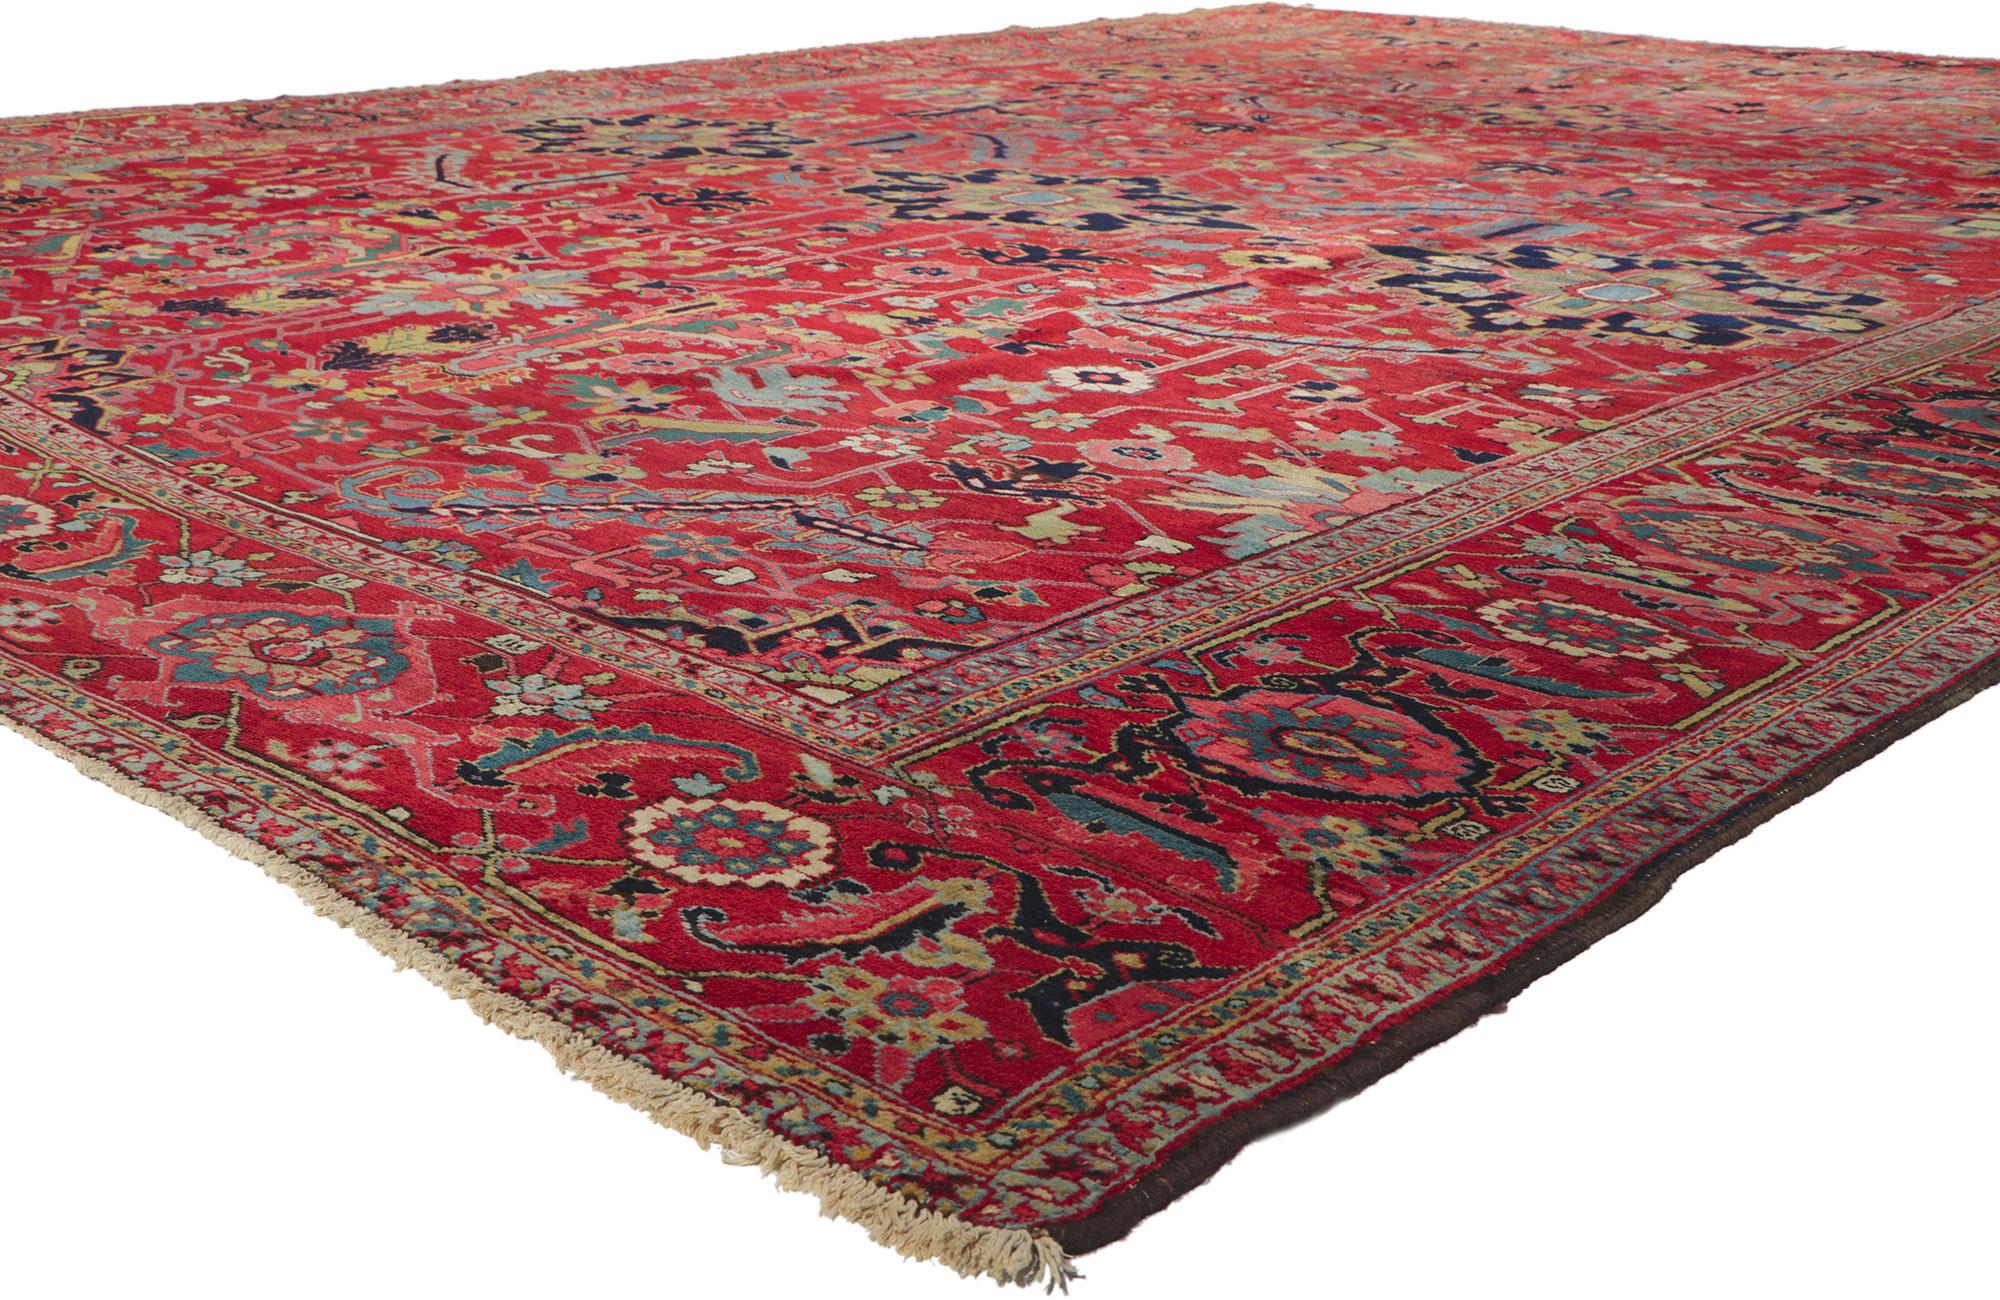 78338 Antique Persian Serapi rug, measures 11'10 x 15'10. Highlighting the coveted allover design, incredible detail and texture, this hand knotted wool antique Persian Serapi rug is a captivating vision of woven beauty. The eye-catching botanical